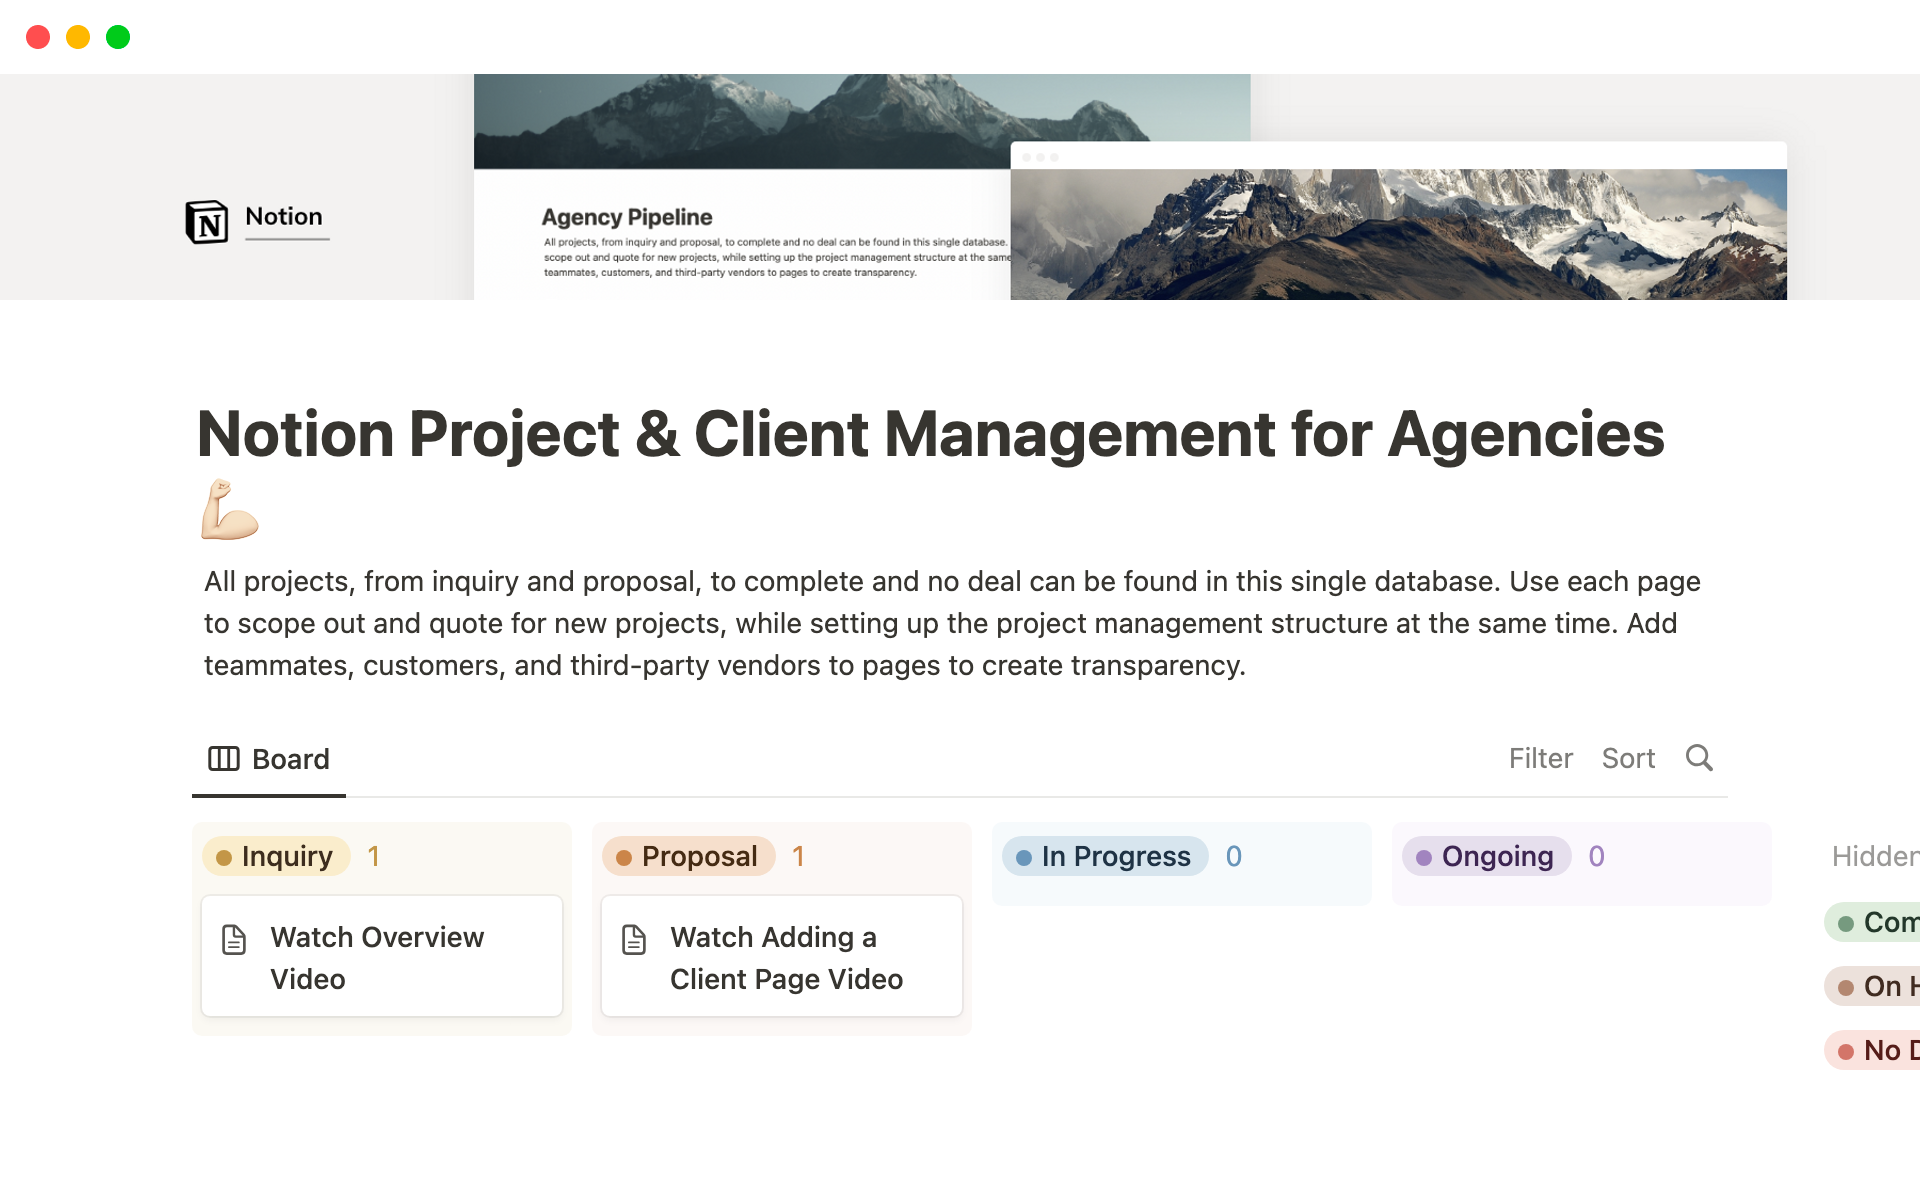 Notion Project & Client Management for Agenciesのテンプレートのプレビュー